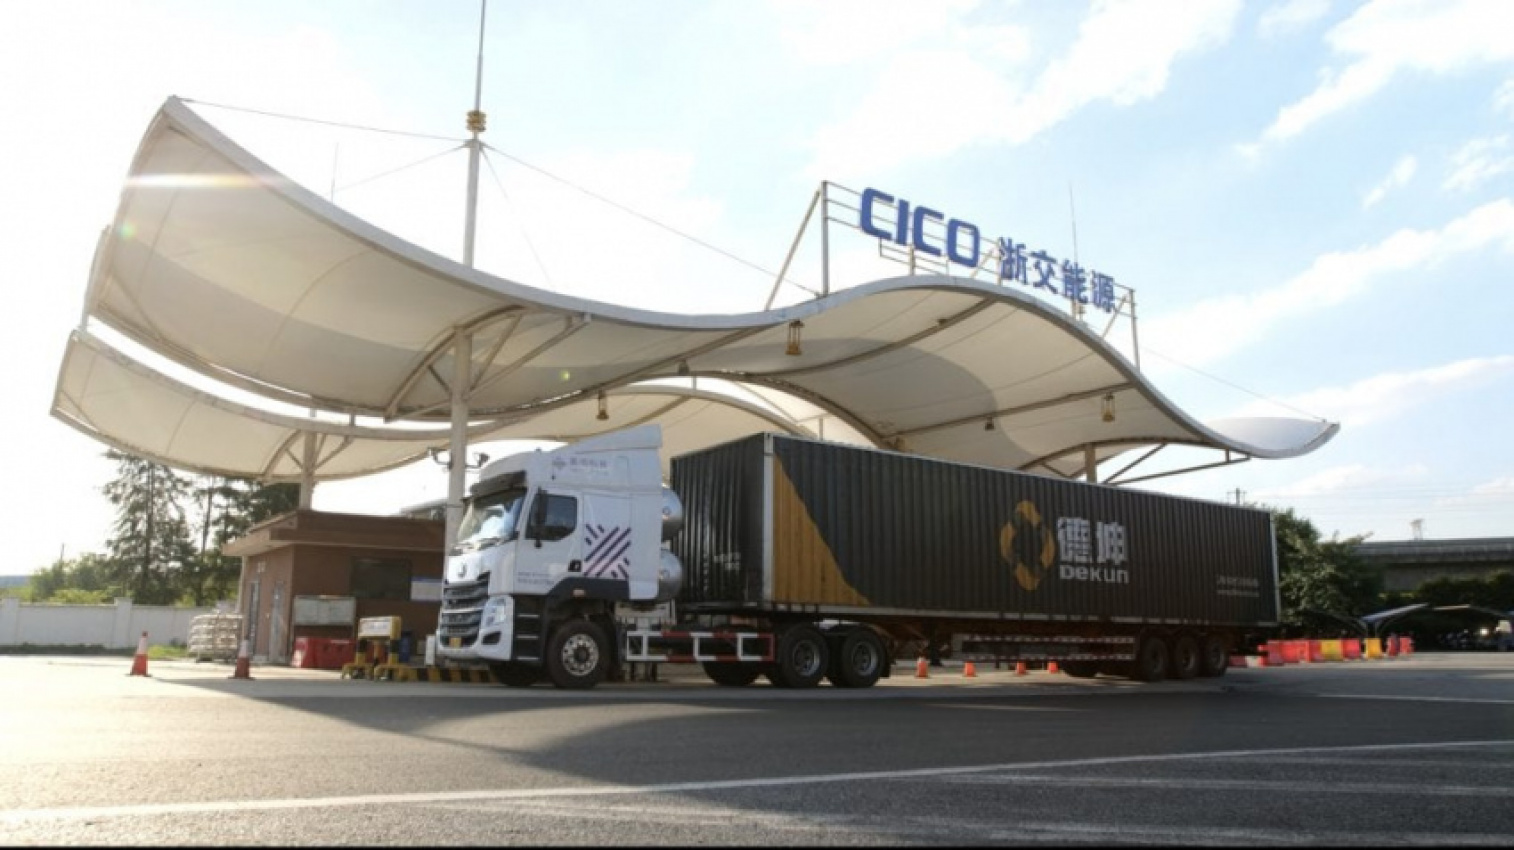 asia, autos, cars, dongfeng commercial vehicles, inceptio technology, julian ma, sinotruk, bringing robo-trucks to a road near you soon – china’s inceptio technology